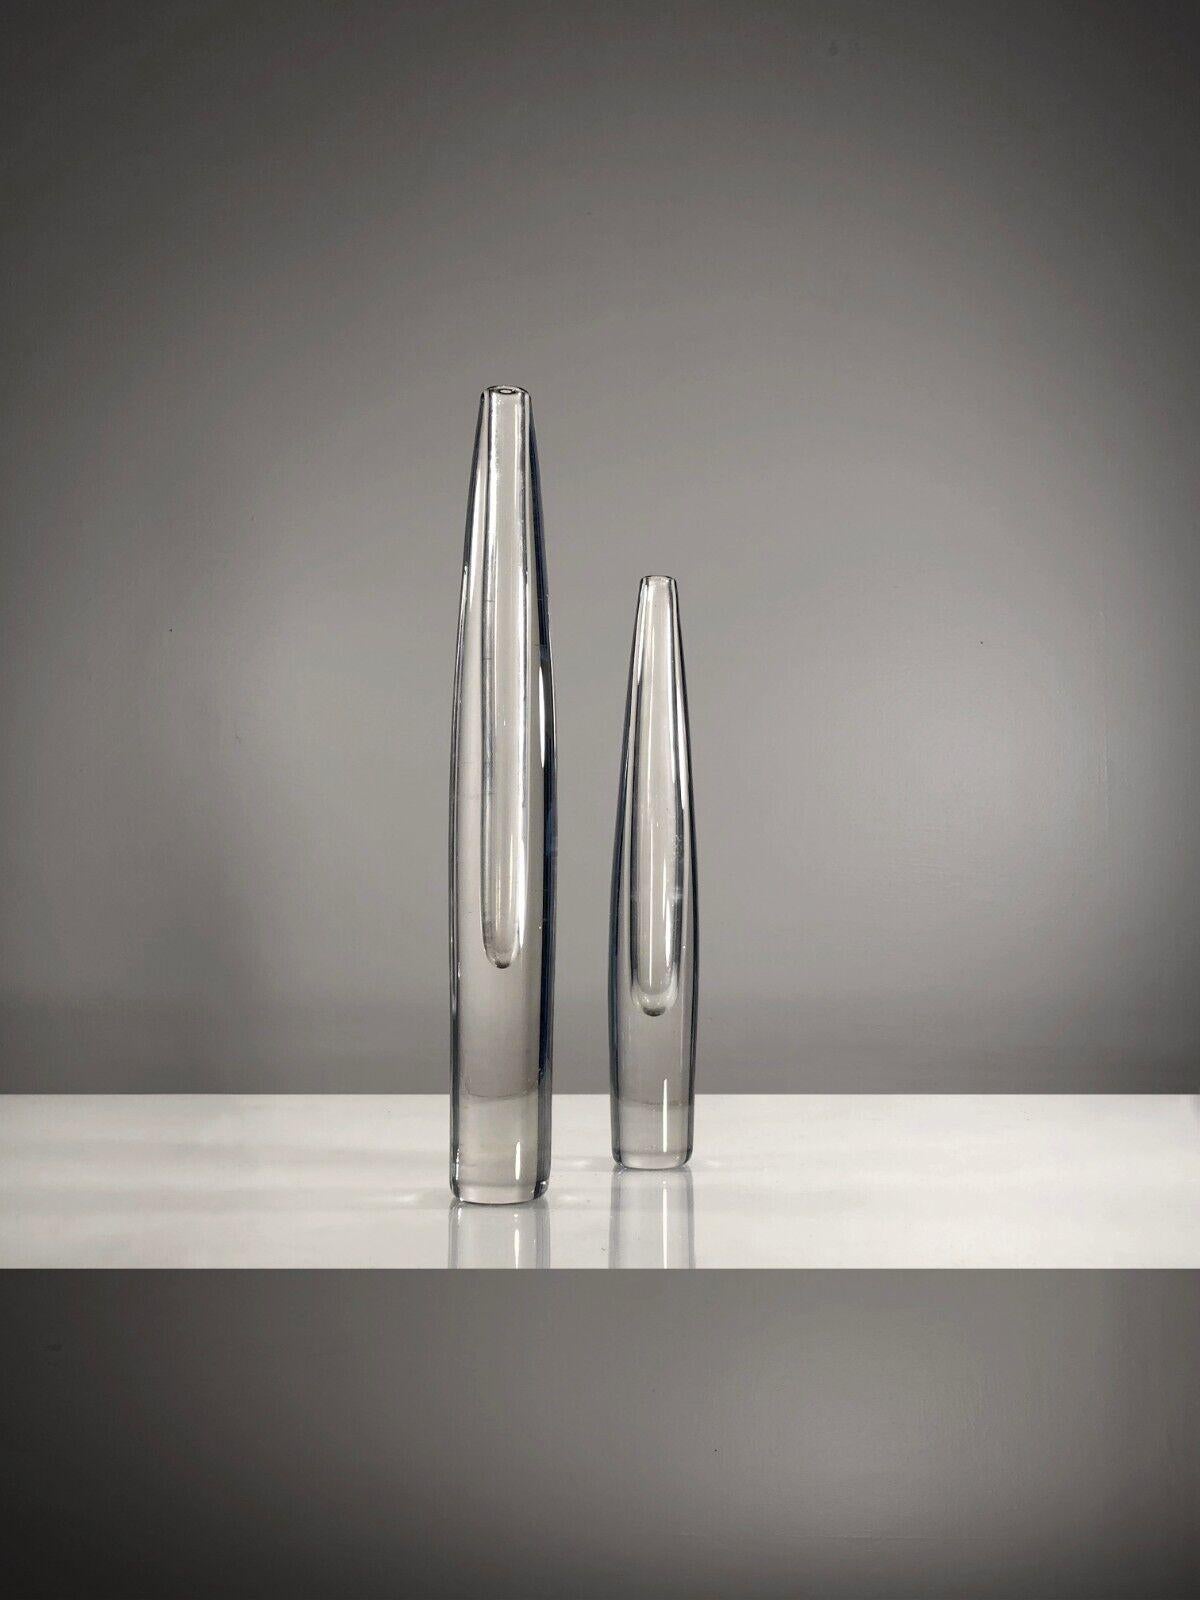 A very beautiful asymmetrical pair of vases, Modernist, Free-Form, Dansk, Scandinavian, in thick transparent glass, model numbers B896 and B894 and Stromberg signatures incised with acid under each base, by Asta Stromberg, Sweden 1970.